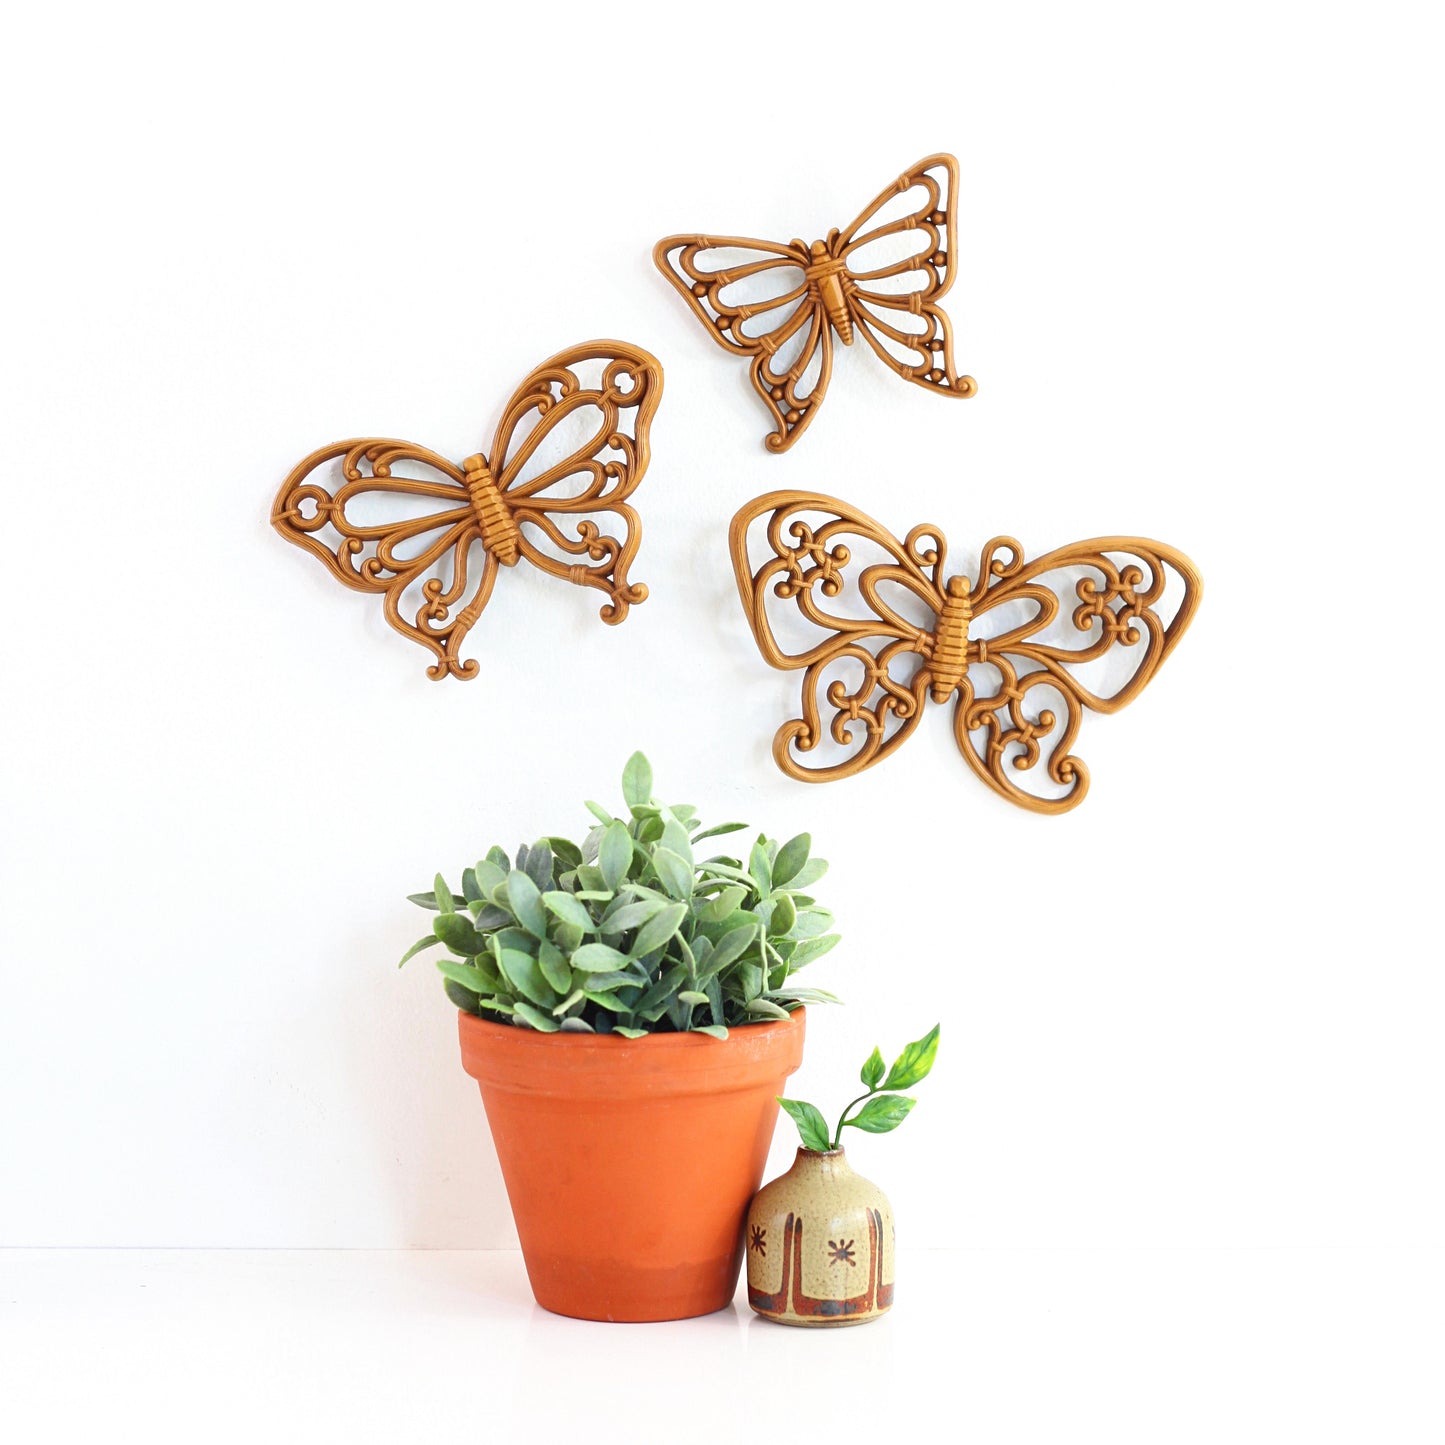 SOLD - Vintage Butterflies Wall Decor by Homco